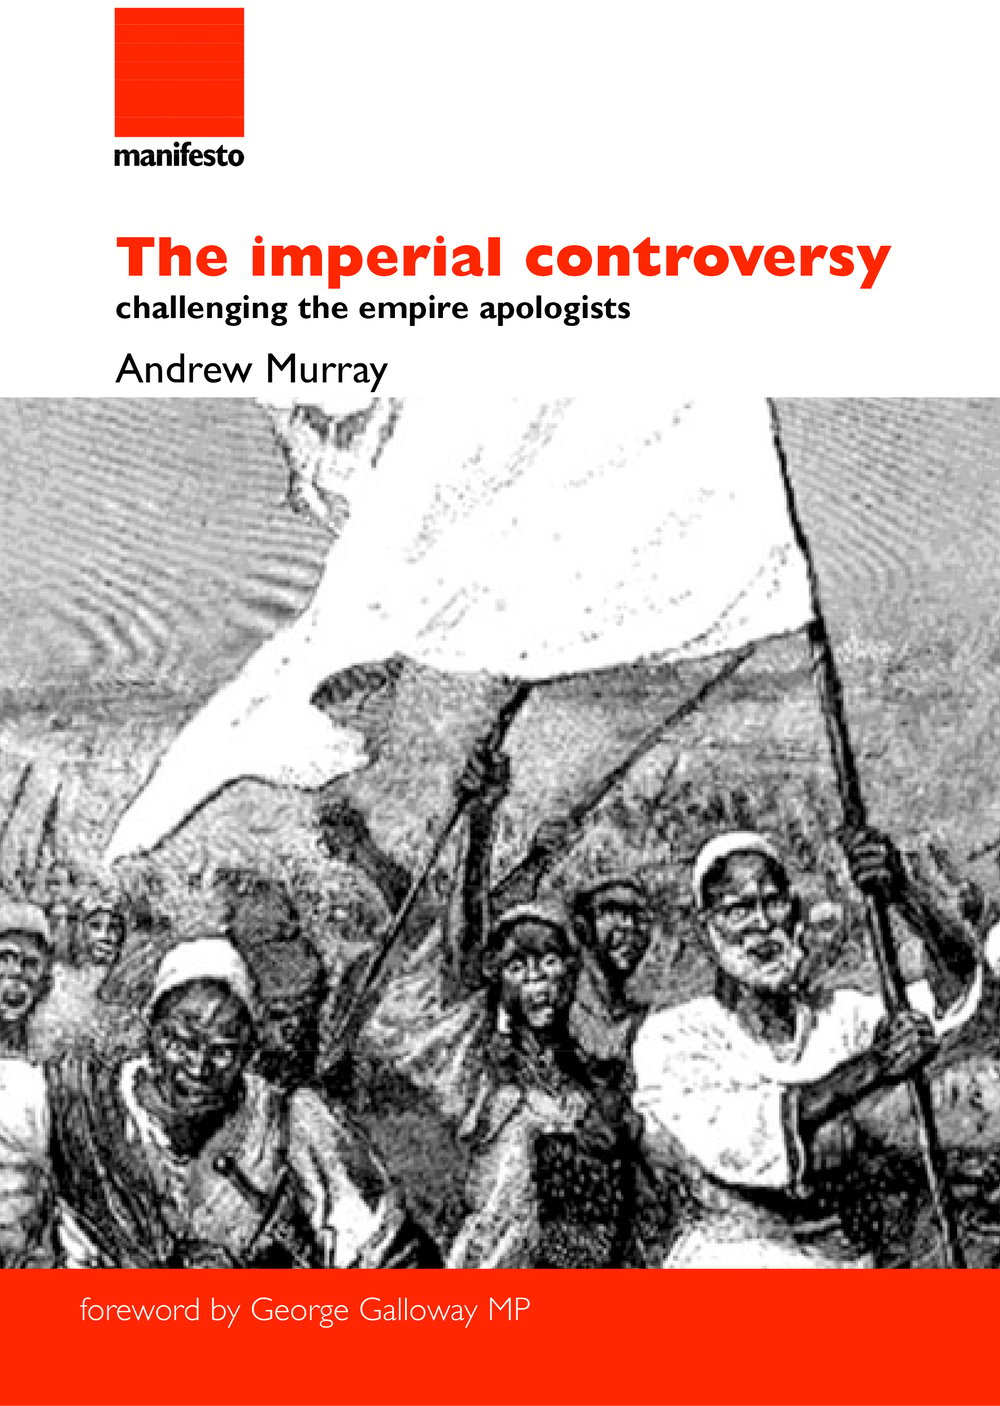 The Imperial Controversy: Challenging the empire apologists